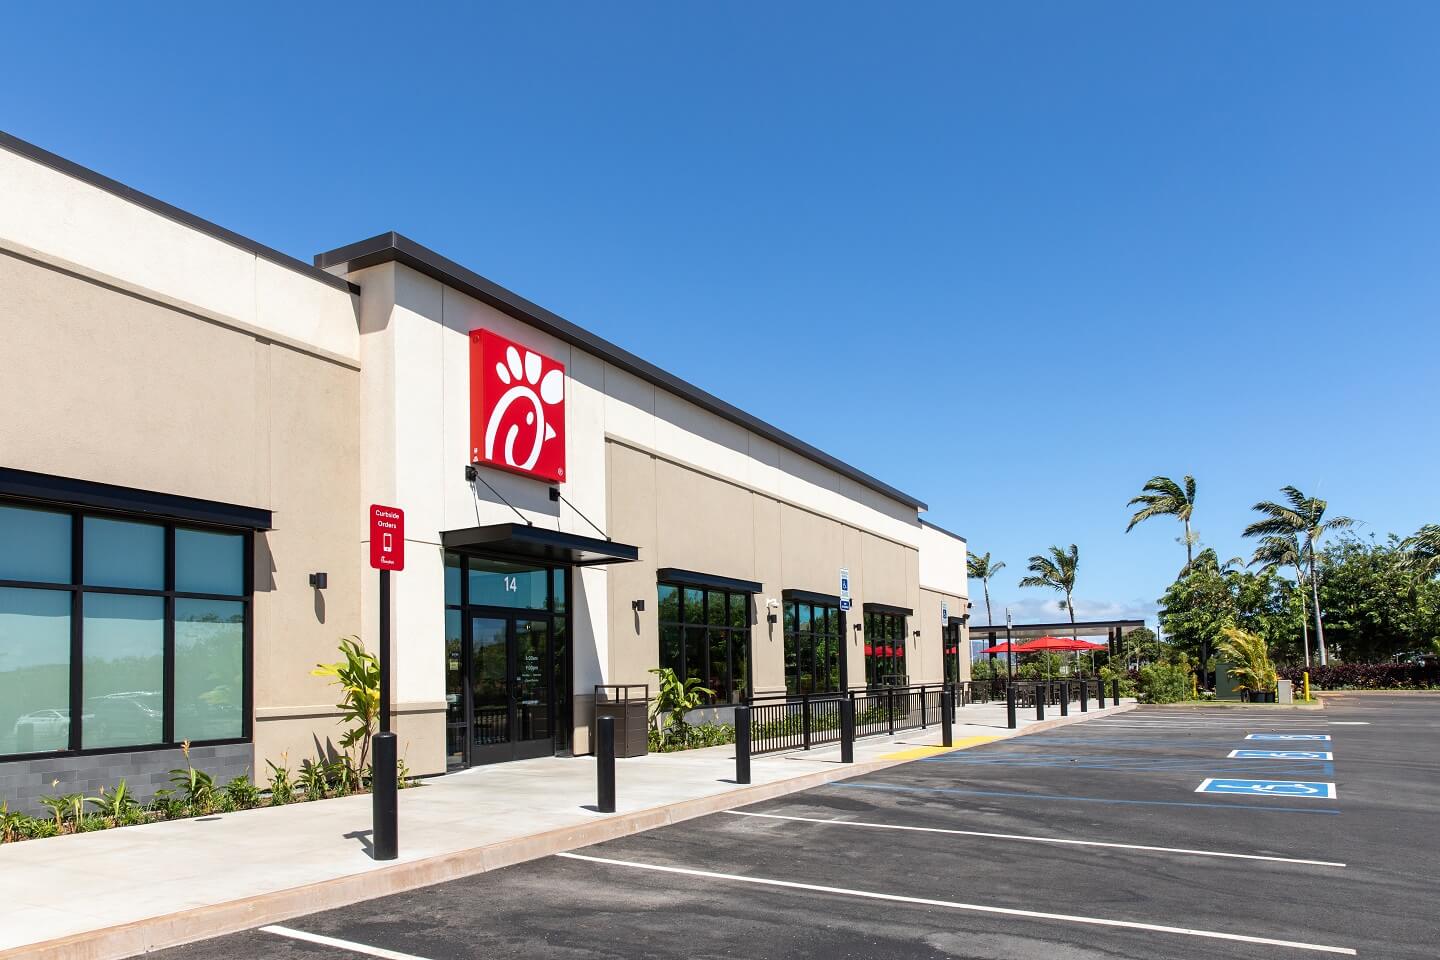 Daytime outside ﻿of the Hawaii Chick-fil-A restaurant